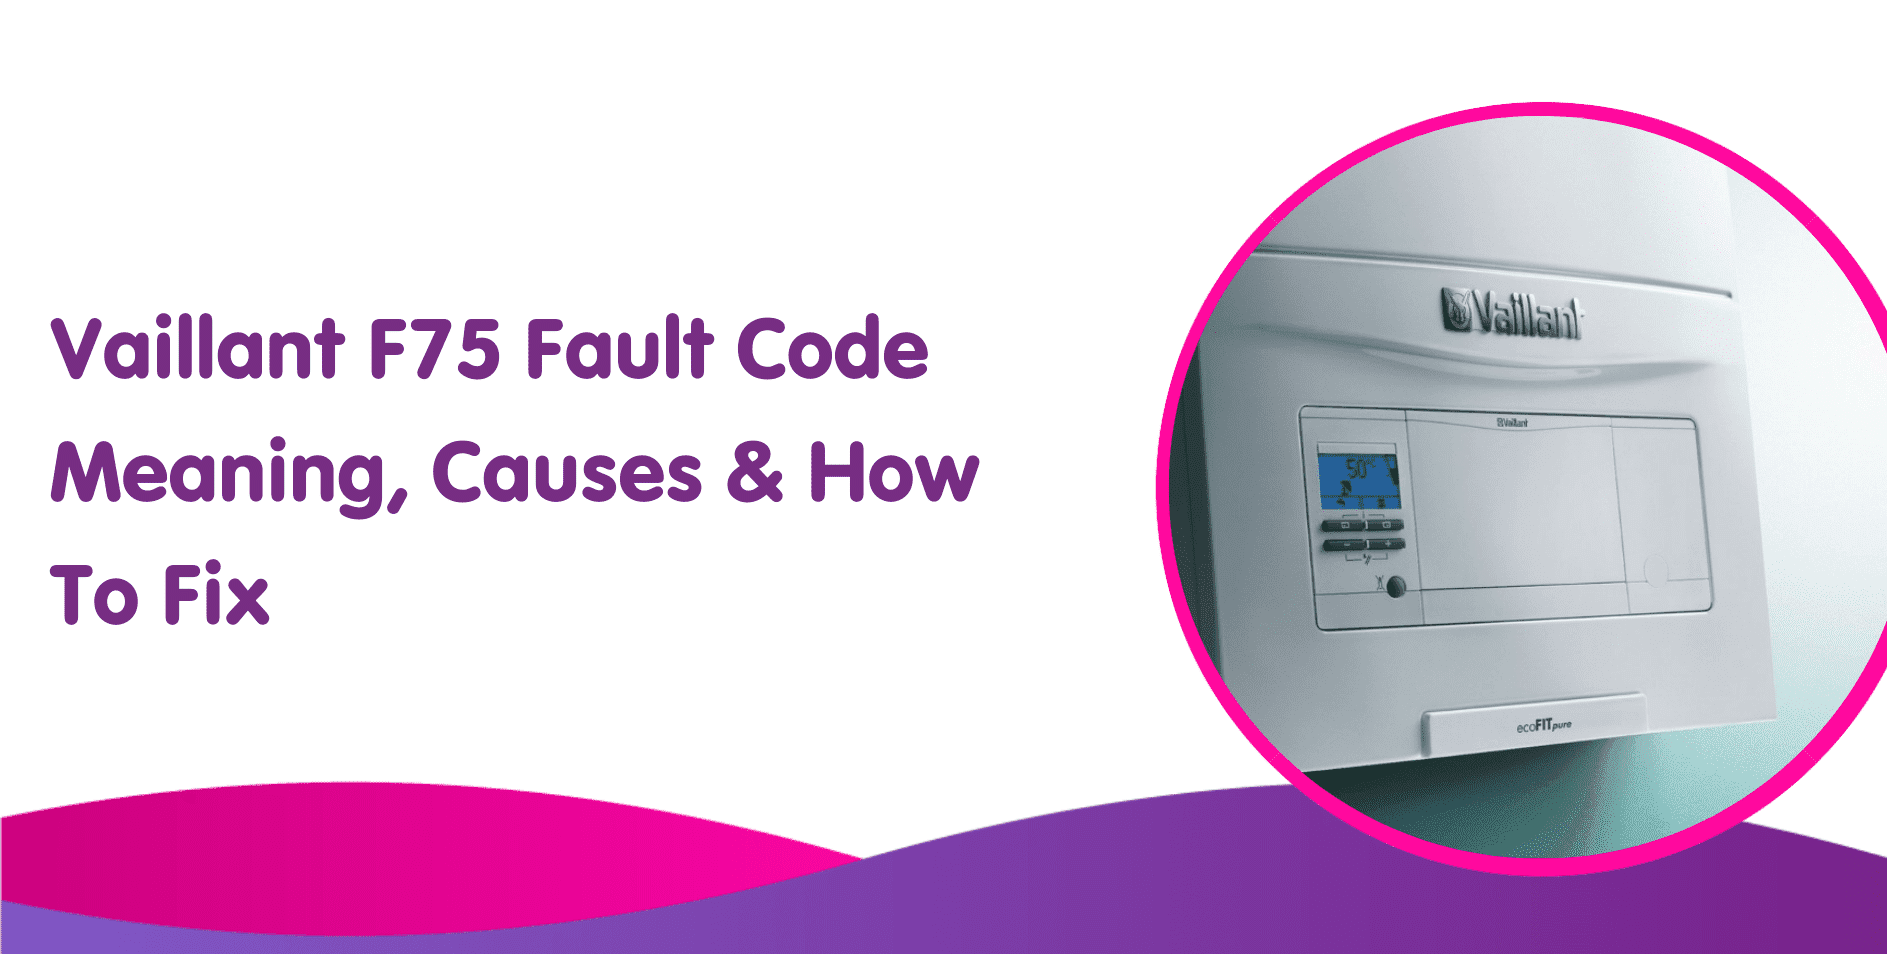 Vaillant F75 Fault Code Meaning, Causes & How To Fix